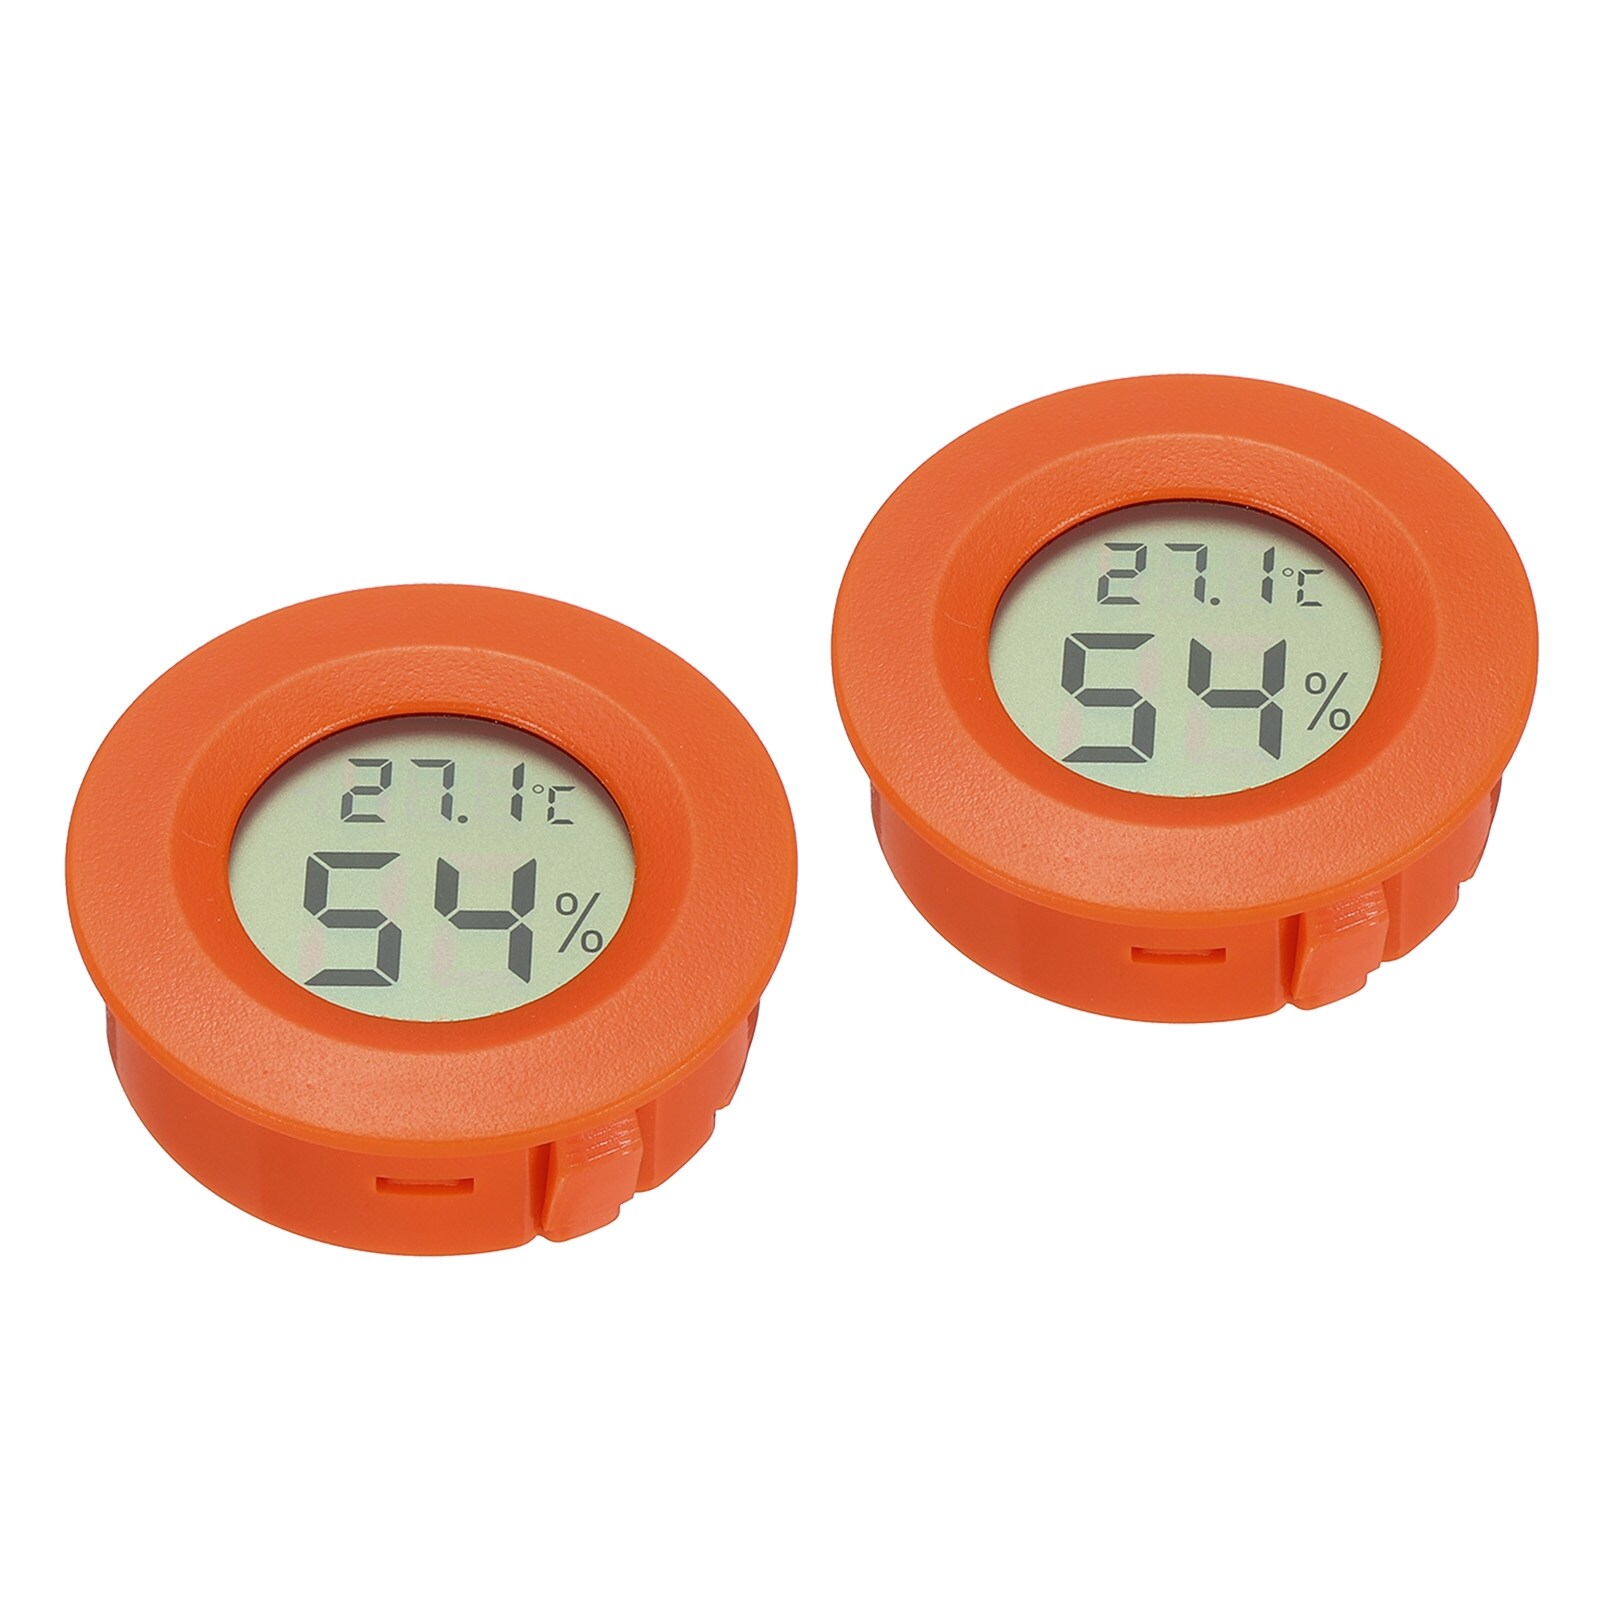 https://ak1.ostkcdn.com/images/products/is/images/direct/fd1c801361849df74e118e0b4388876cff93edc1/2Pcs-Mini-Thermometer-Hygrometer-Digital-LCD-Temperature-Humidity-Meter-Red.jpg